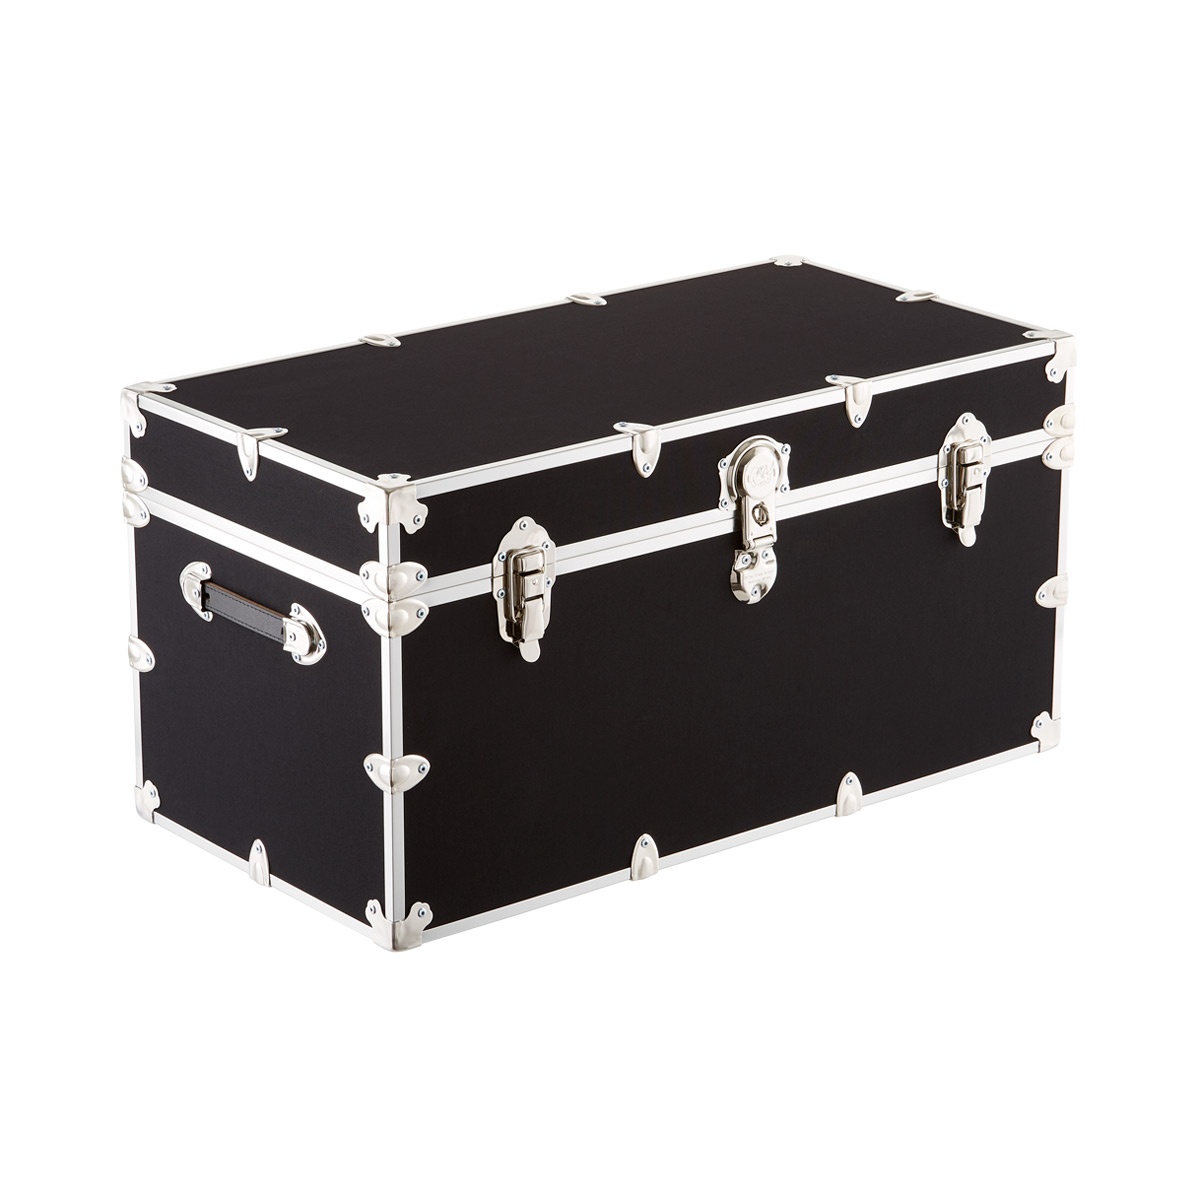 Rhino Deluxe Locking Rolling Storage Trunk | The Container Store